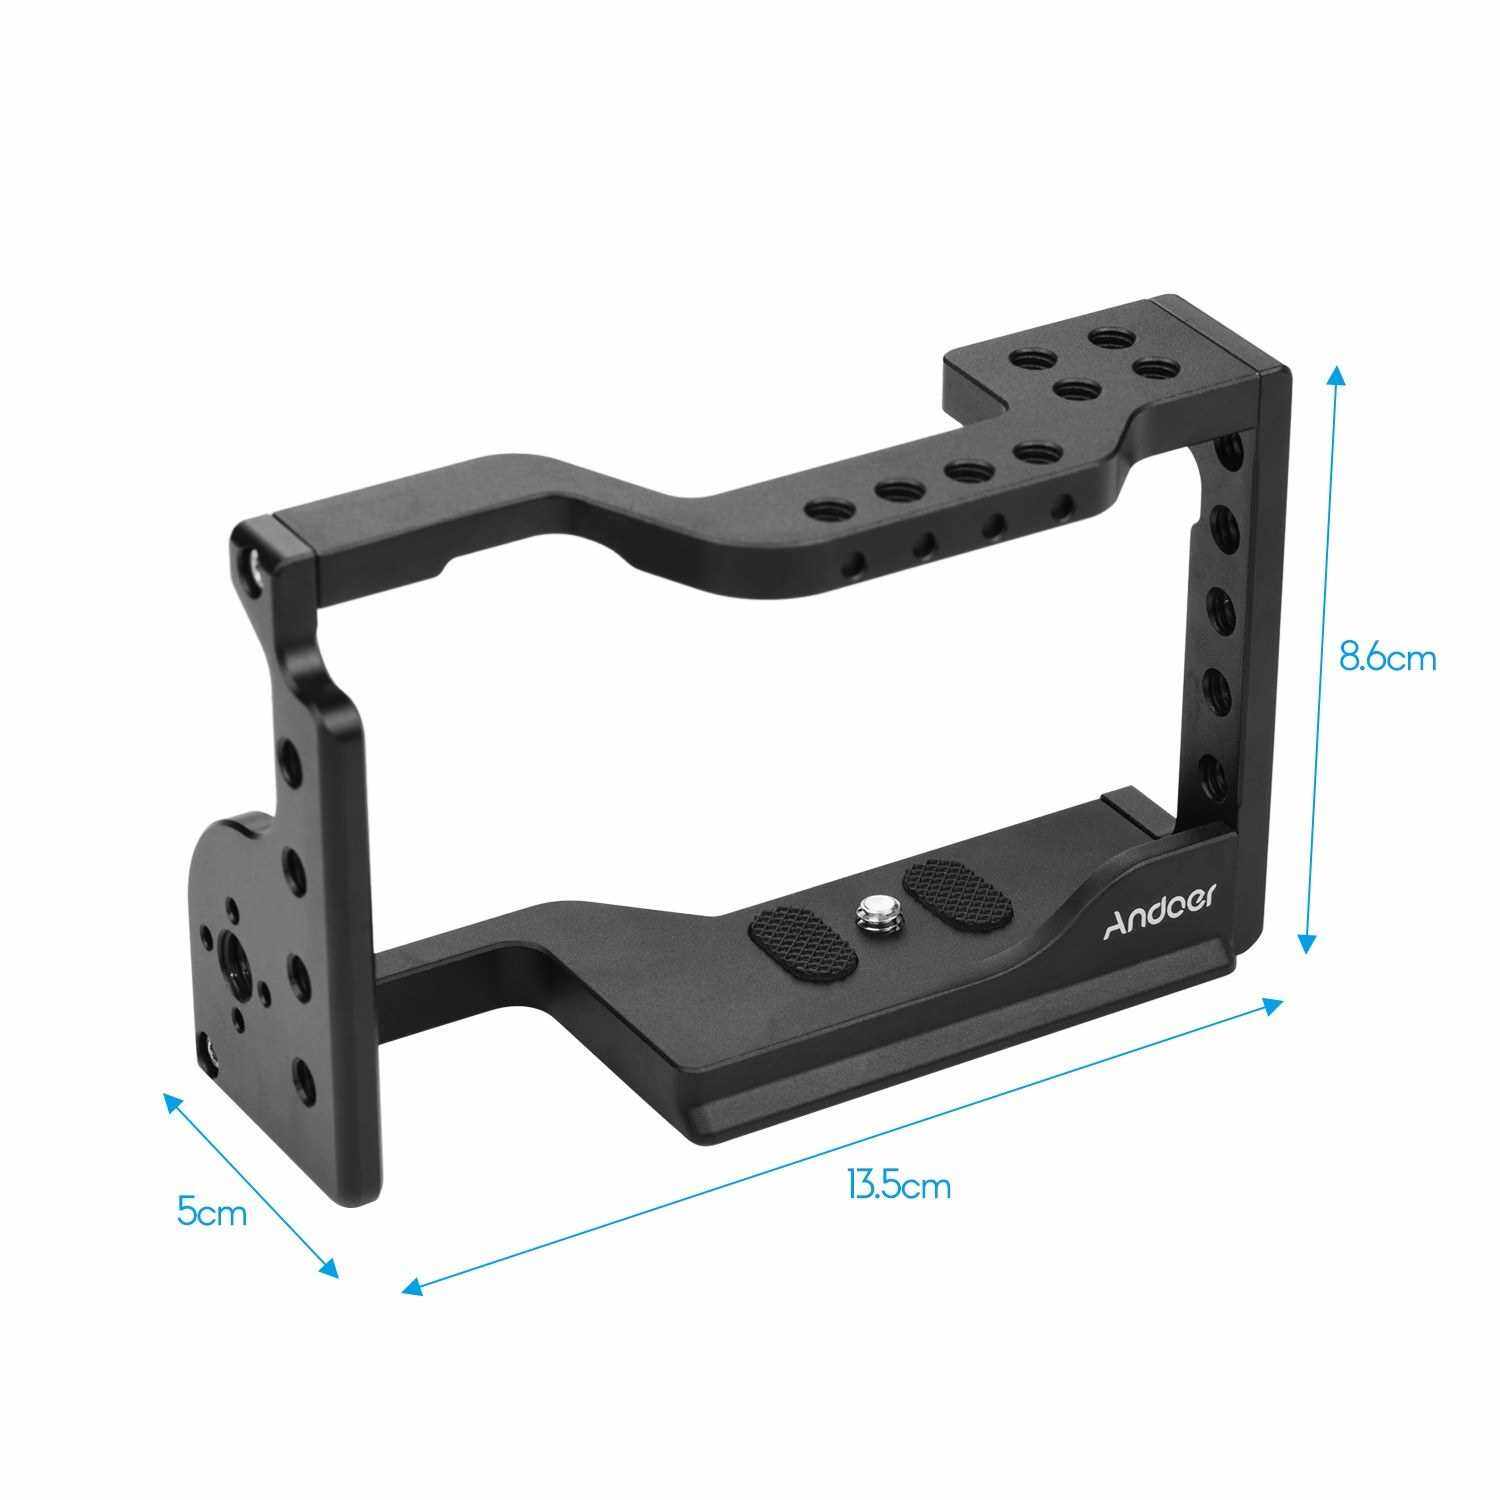 Andoer Professional Video Accessories Camera Cage Kit Aluminum Alloy Camera Case Bracket with Extension Thread Holes Cold Shoe Mount Filming Equipment Compatible with Sony A6600 ILDC Cameras (Standard)